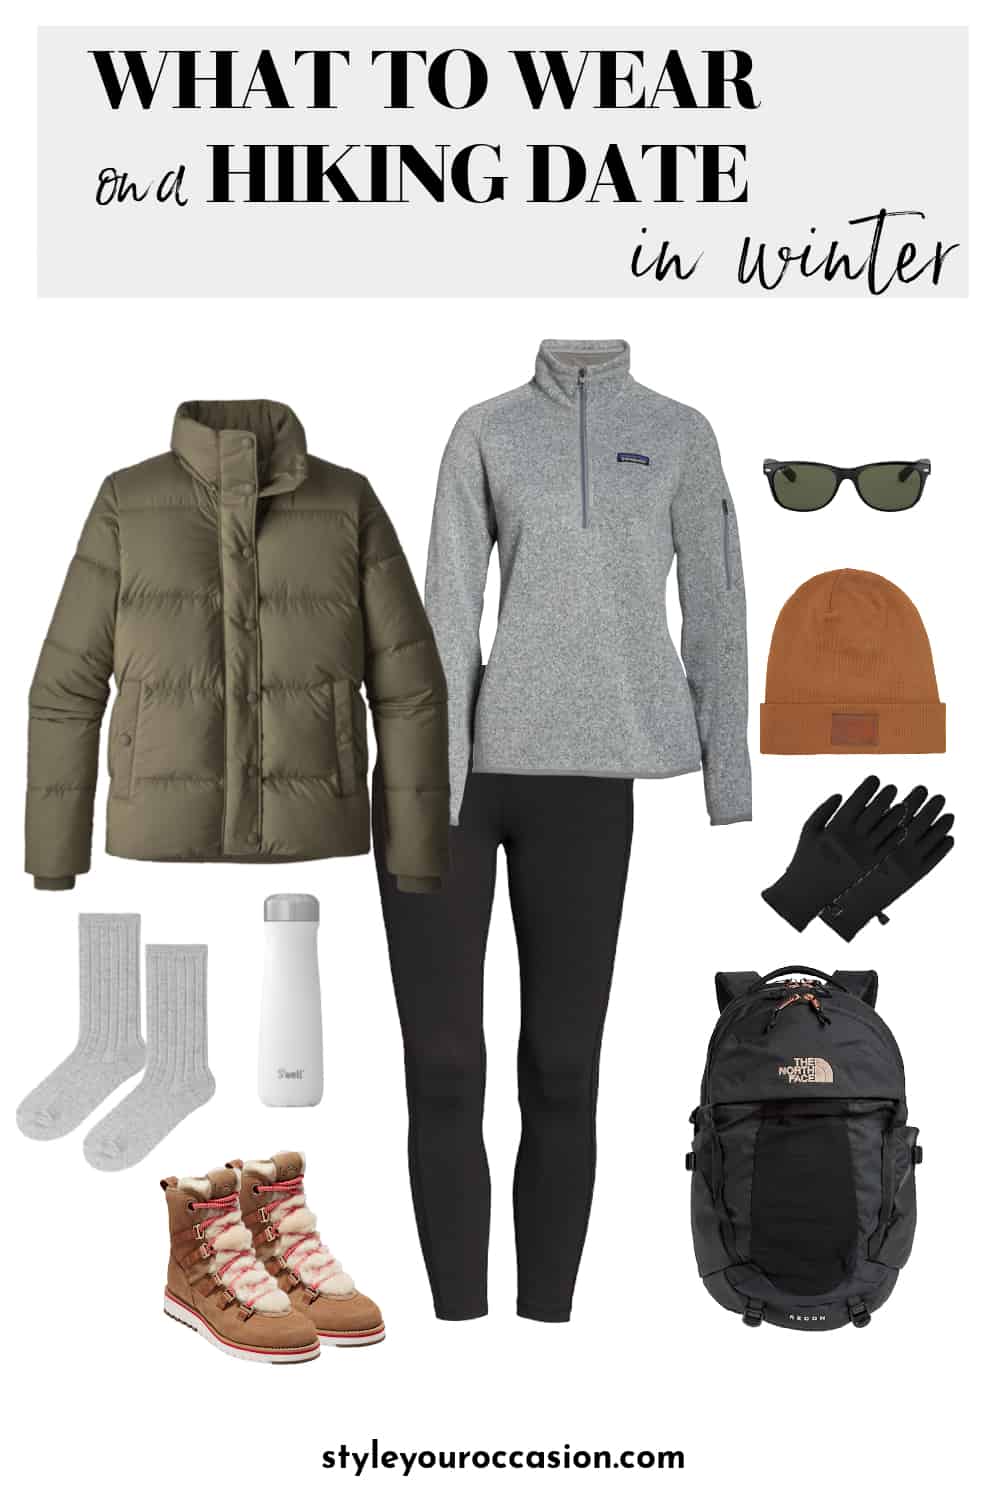 What To Wear On A Hiking Date in Winter